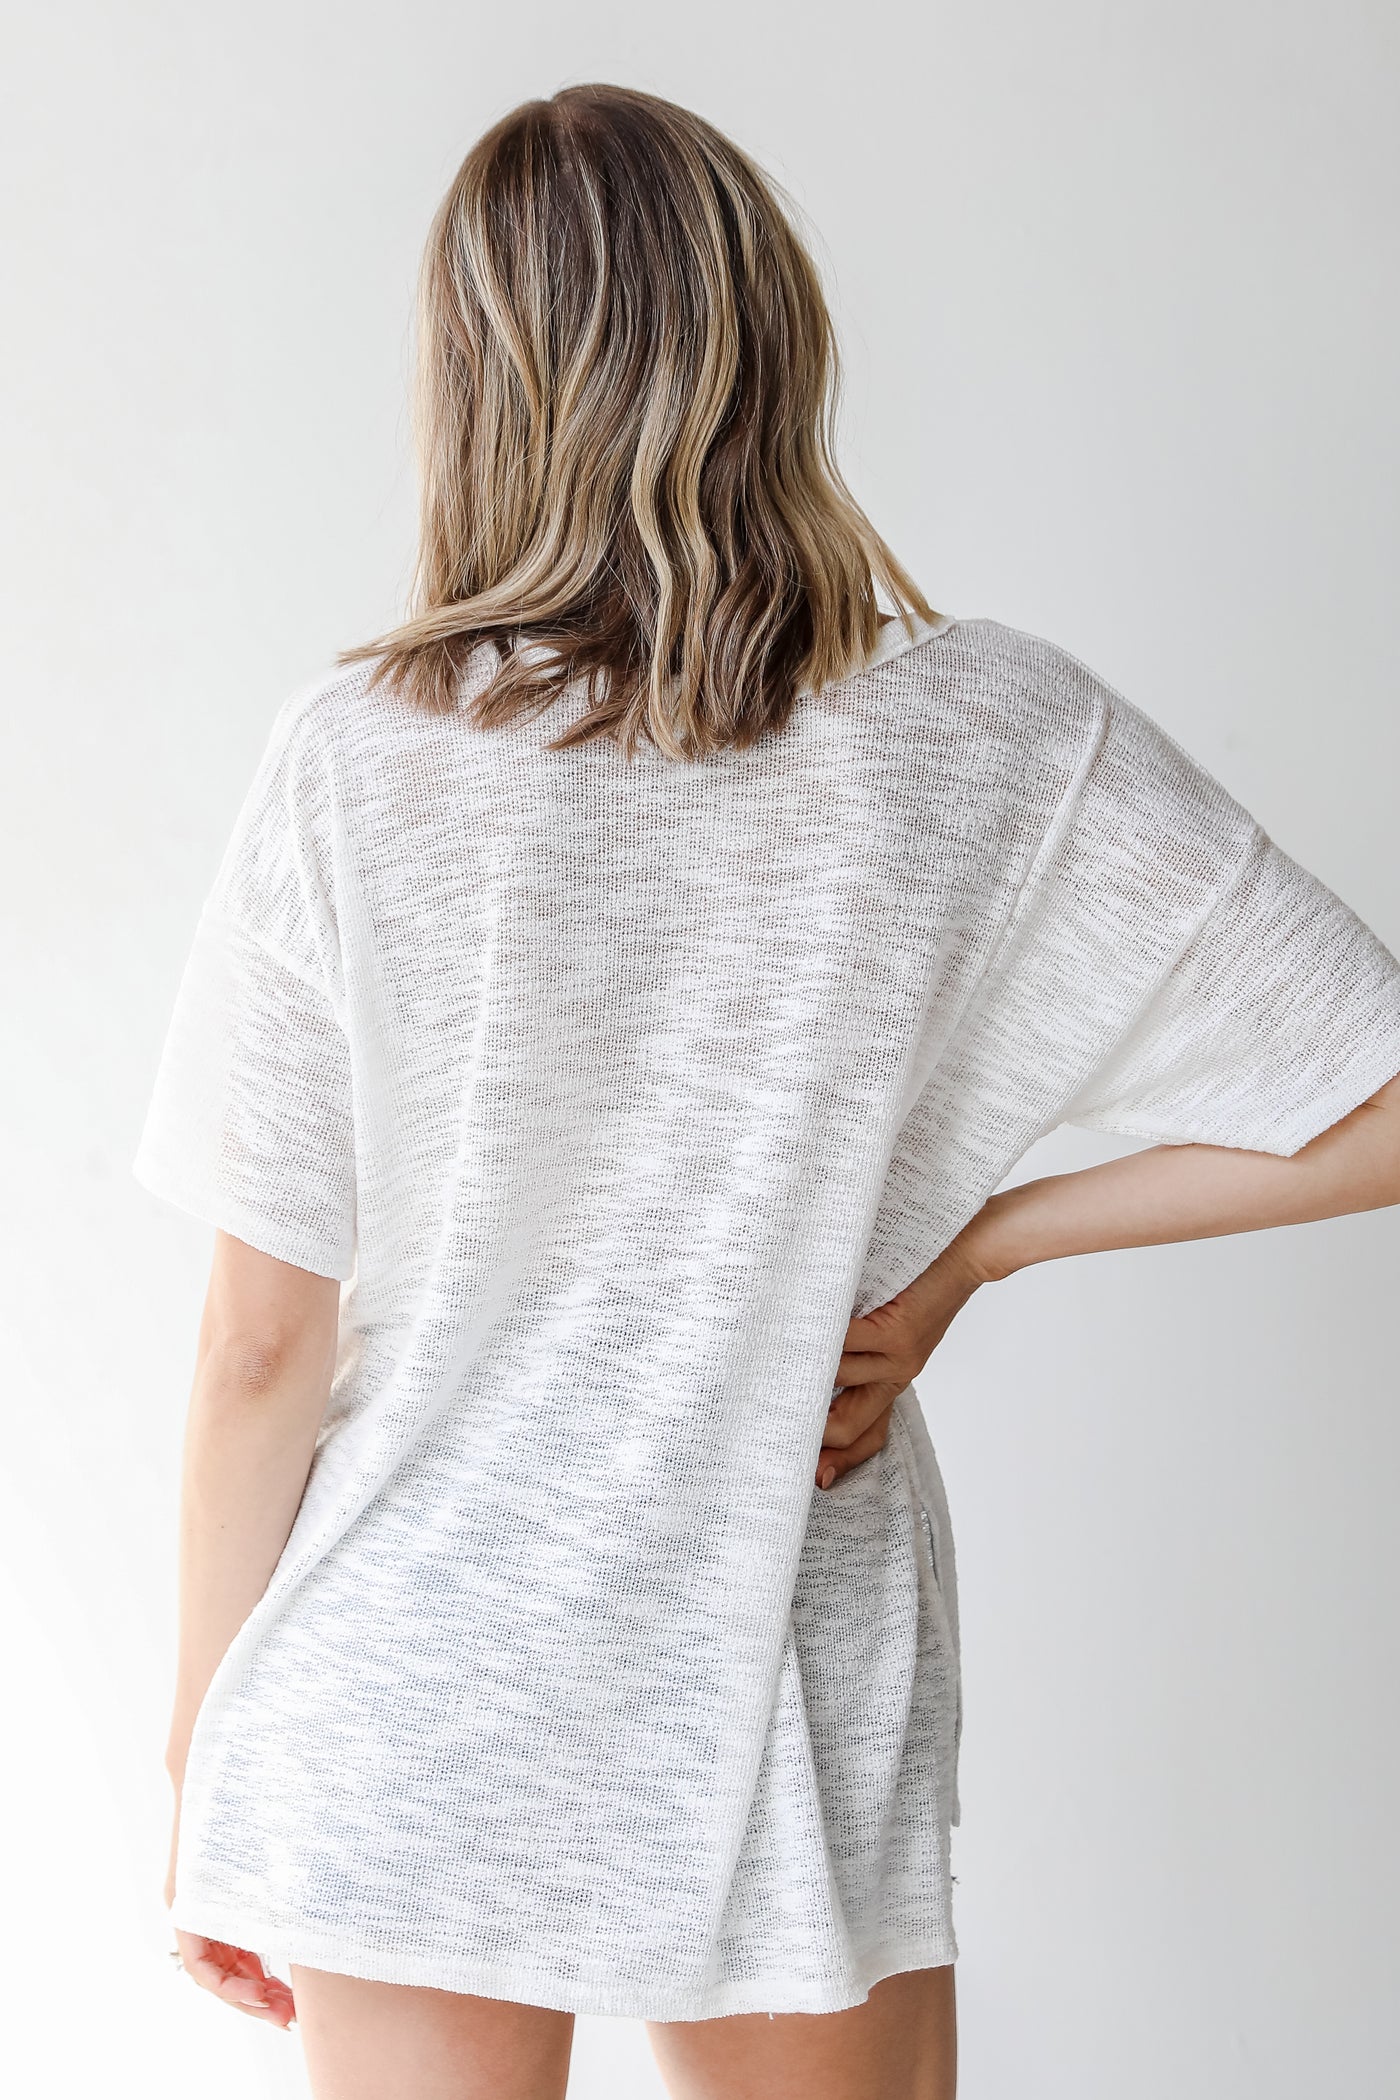 Knit Tee in white back view